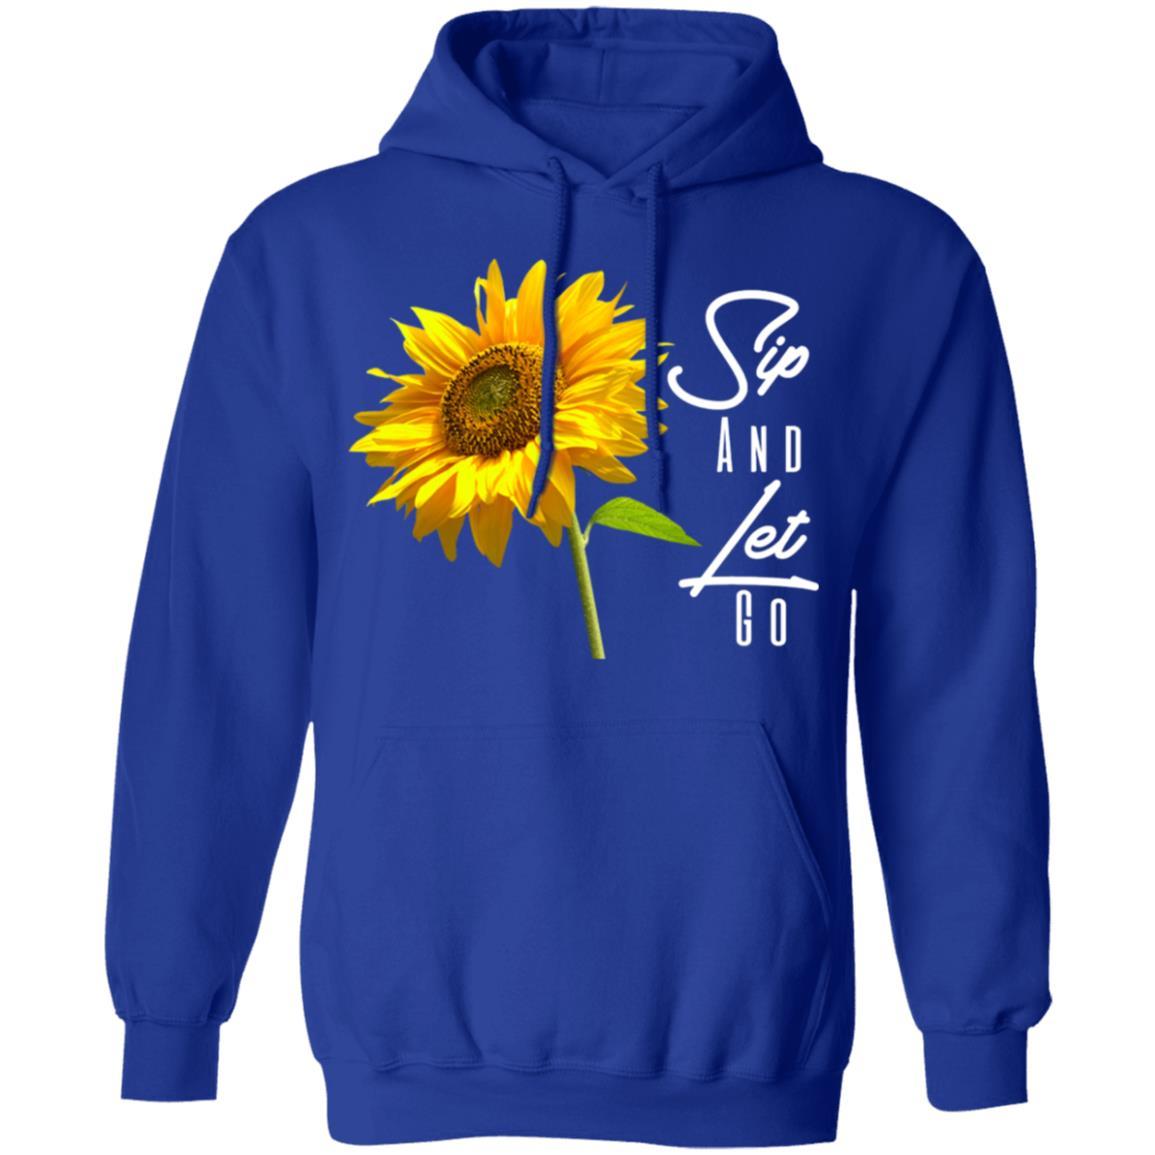 Sip And Let Go Pullover Hoodie Blue - Loyalty Vibes